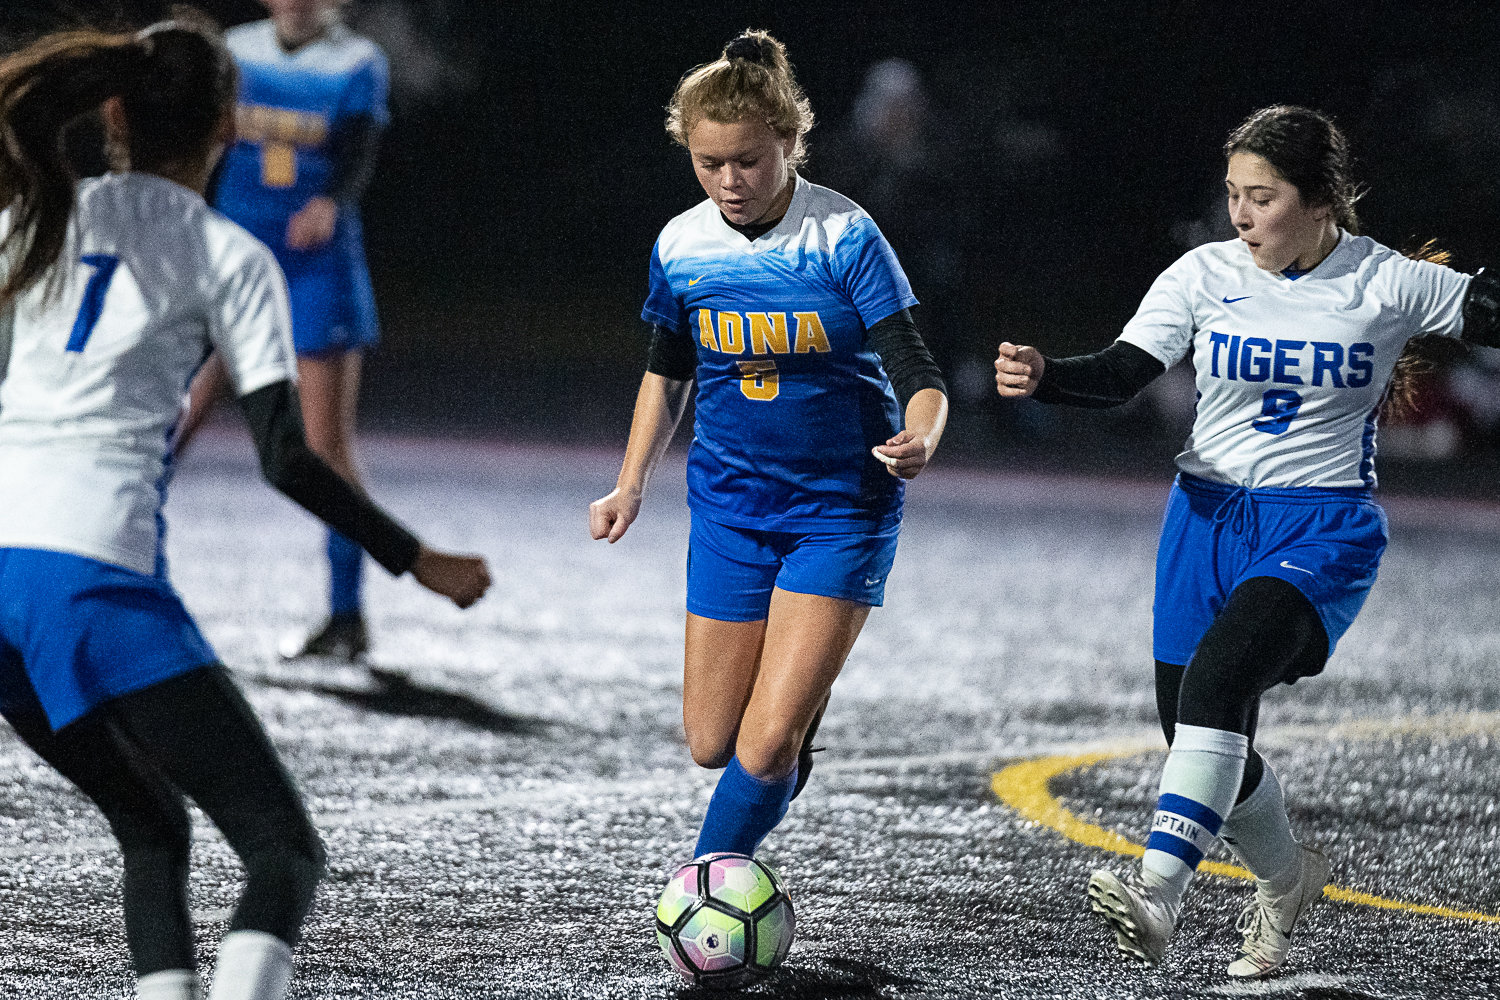 Adna's Alainna Roller dribbles through defenders against Tonasket in the first round of the state playoffs at Tenino Beaver Stadium Nov. 9.